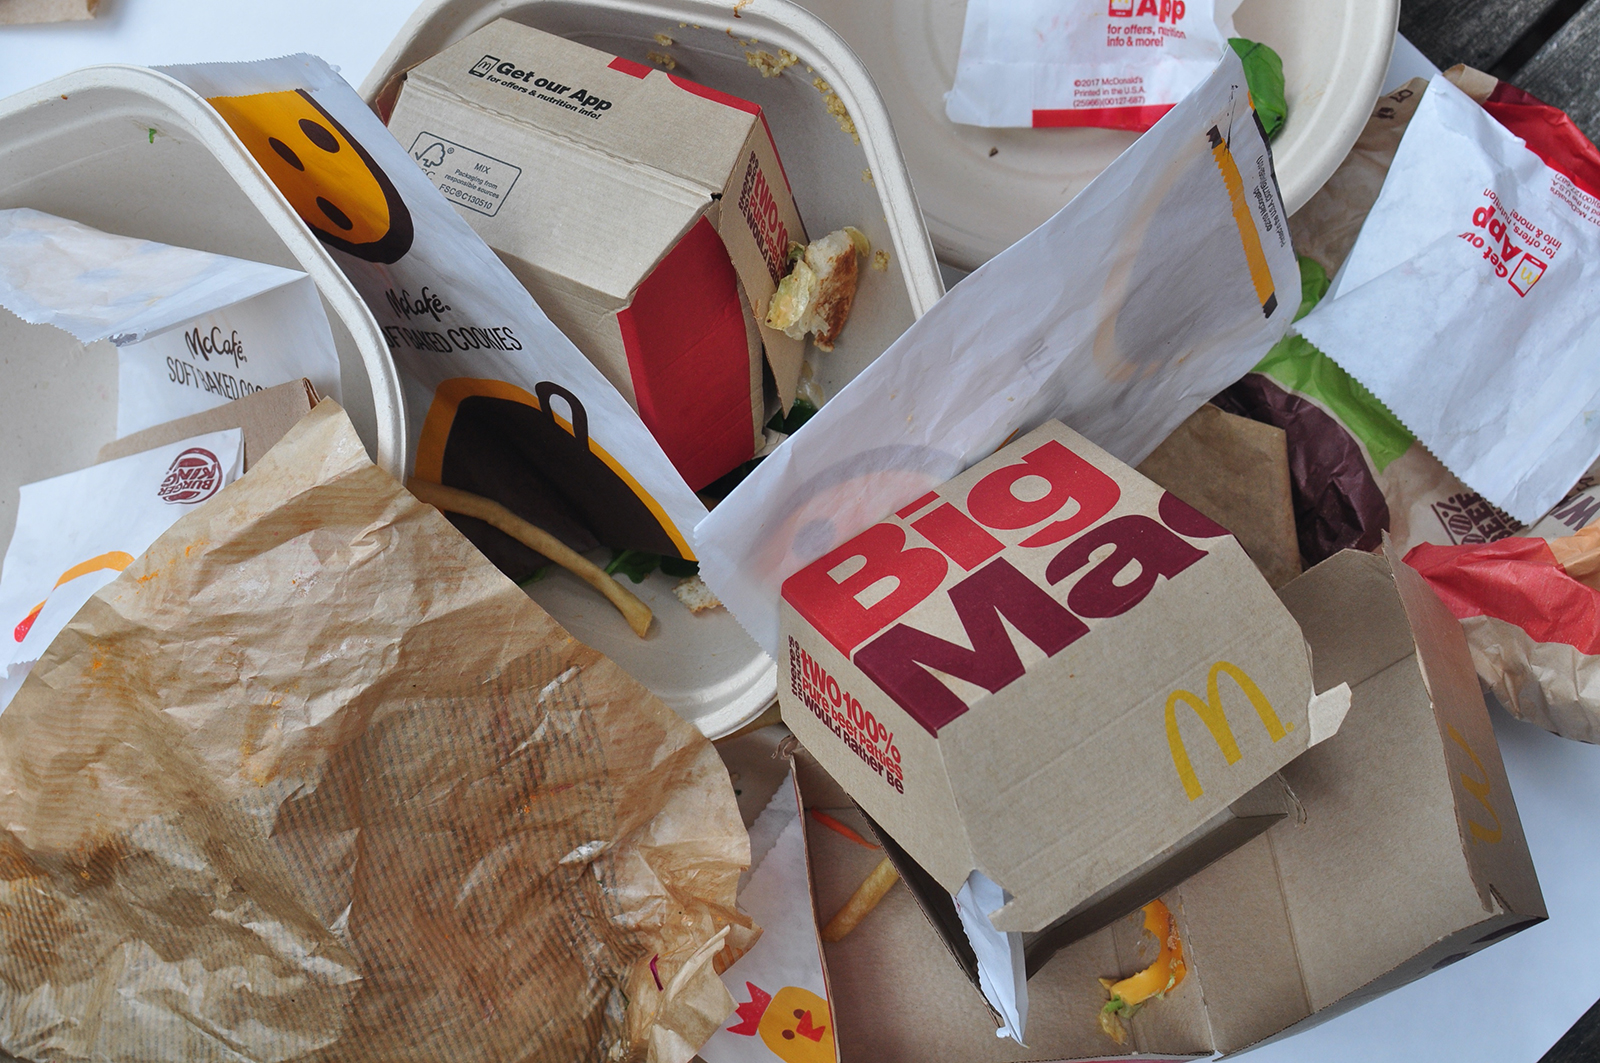 Toxic Chemicals May Be in Fast Food Wrappers, Take-Out Containers: Report